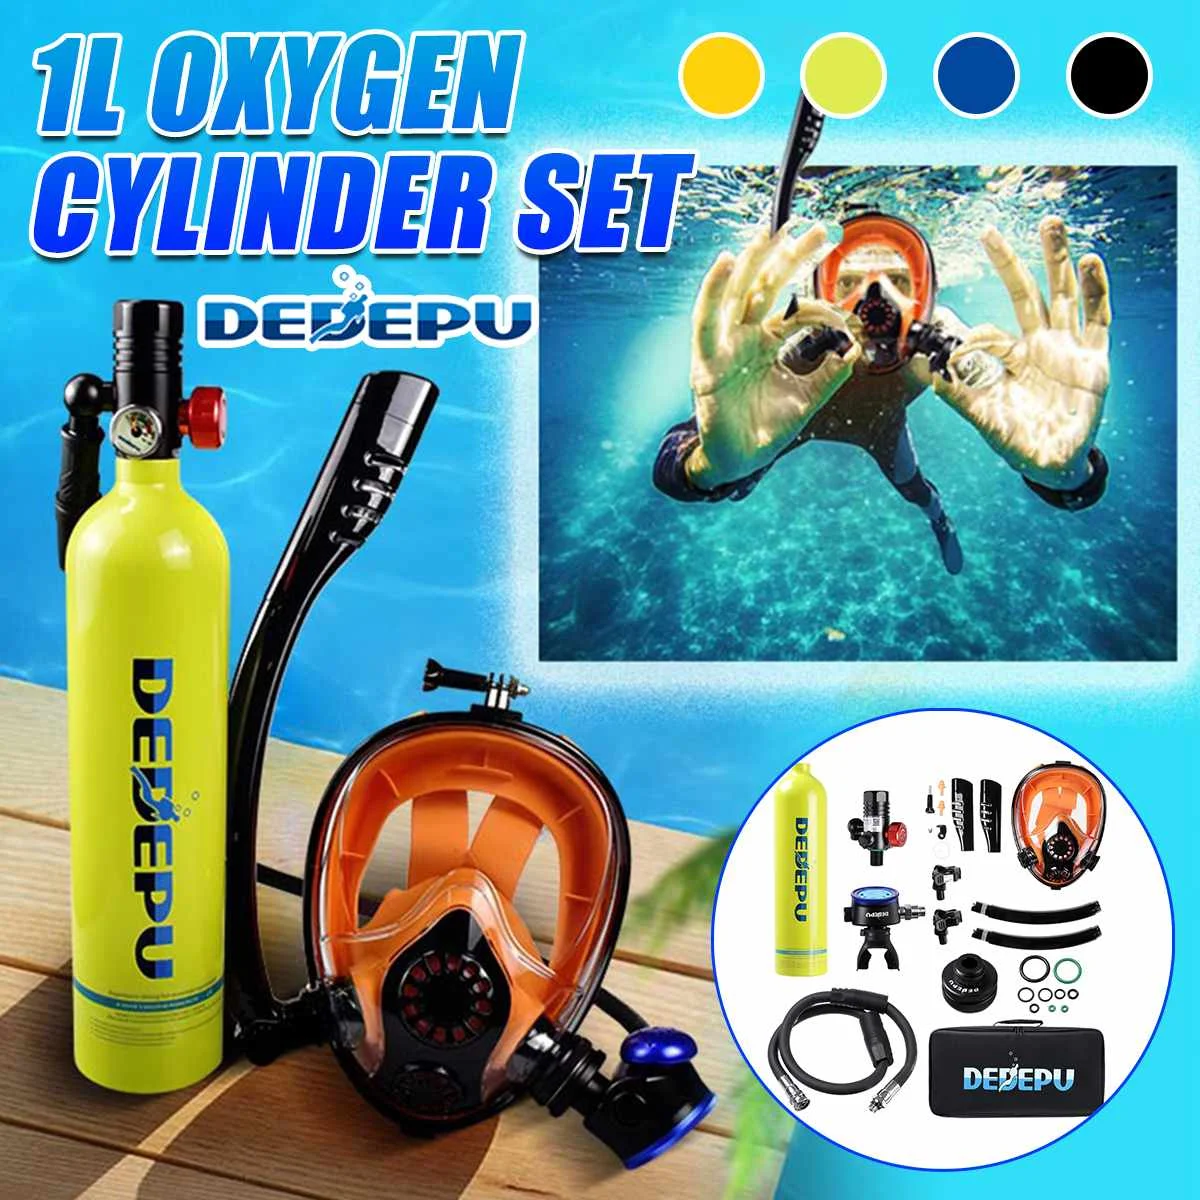 

DEDEPU 1L Oxygen Cylinder Scuba Diving Tank Dive Respirator Underwater Breathing Equipment Tool Set with Full Face Snorkel Mask